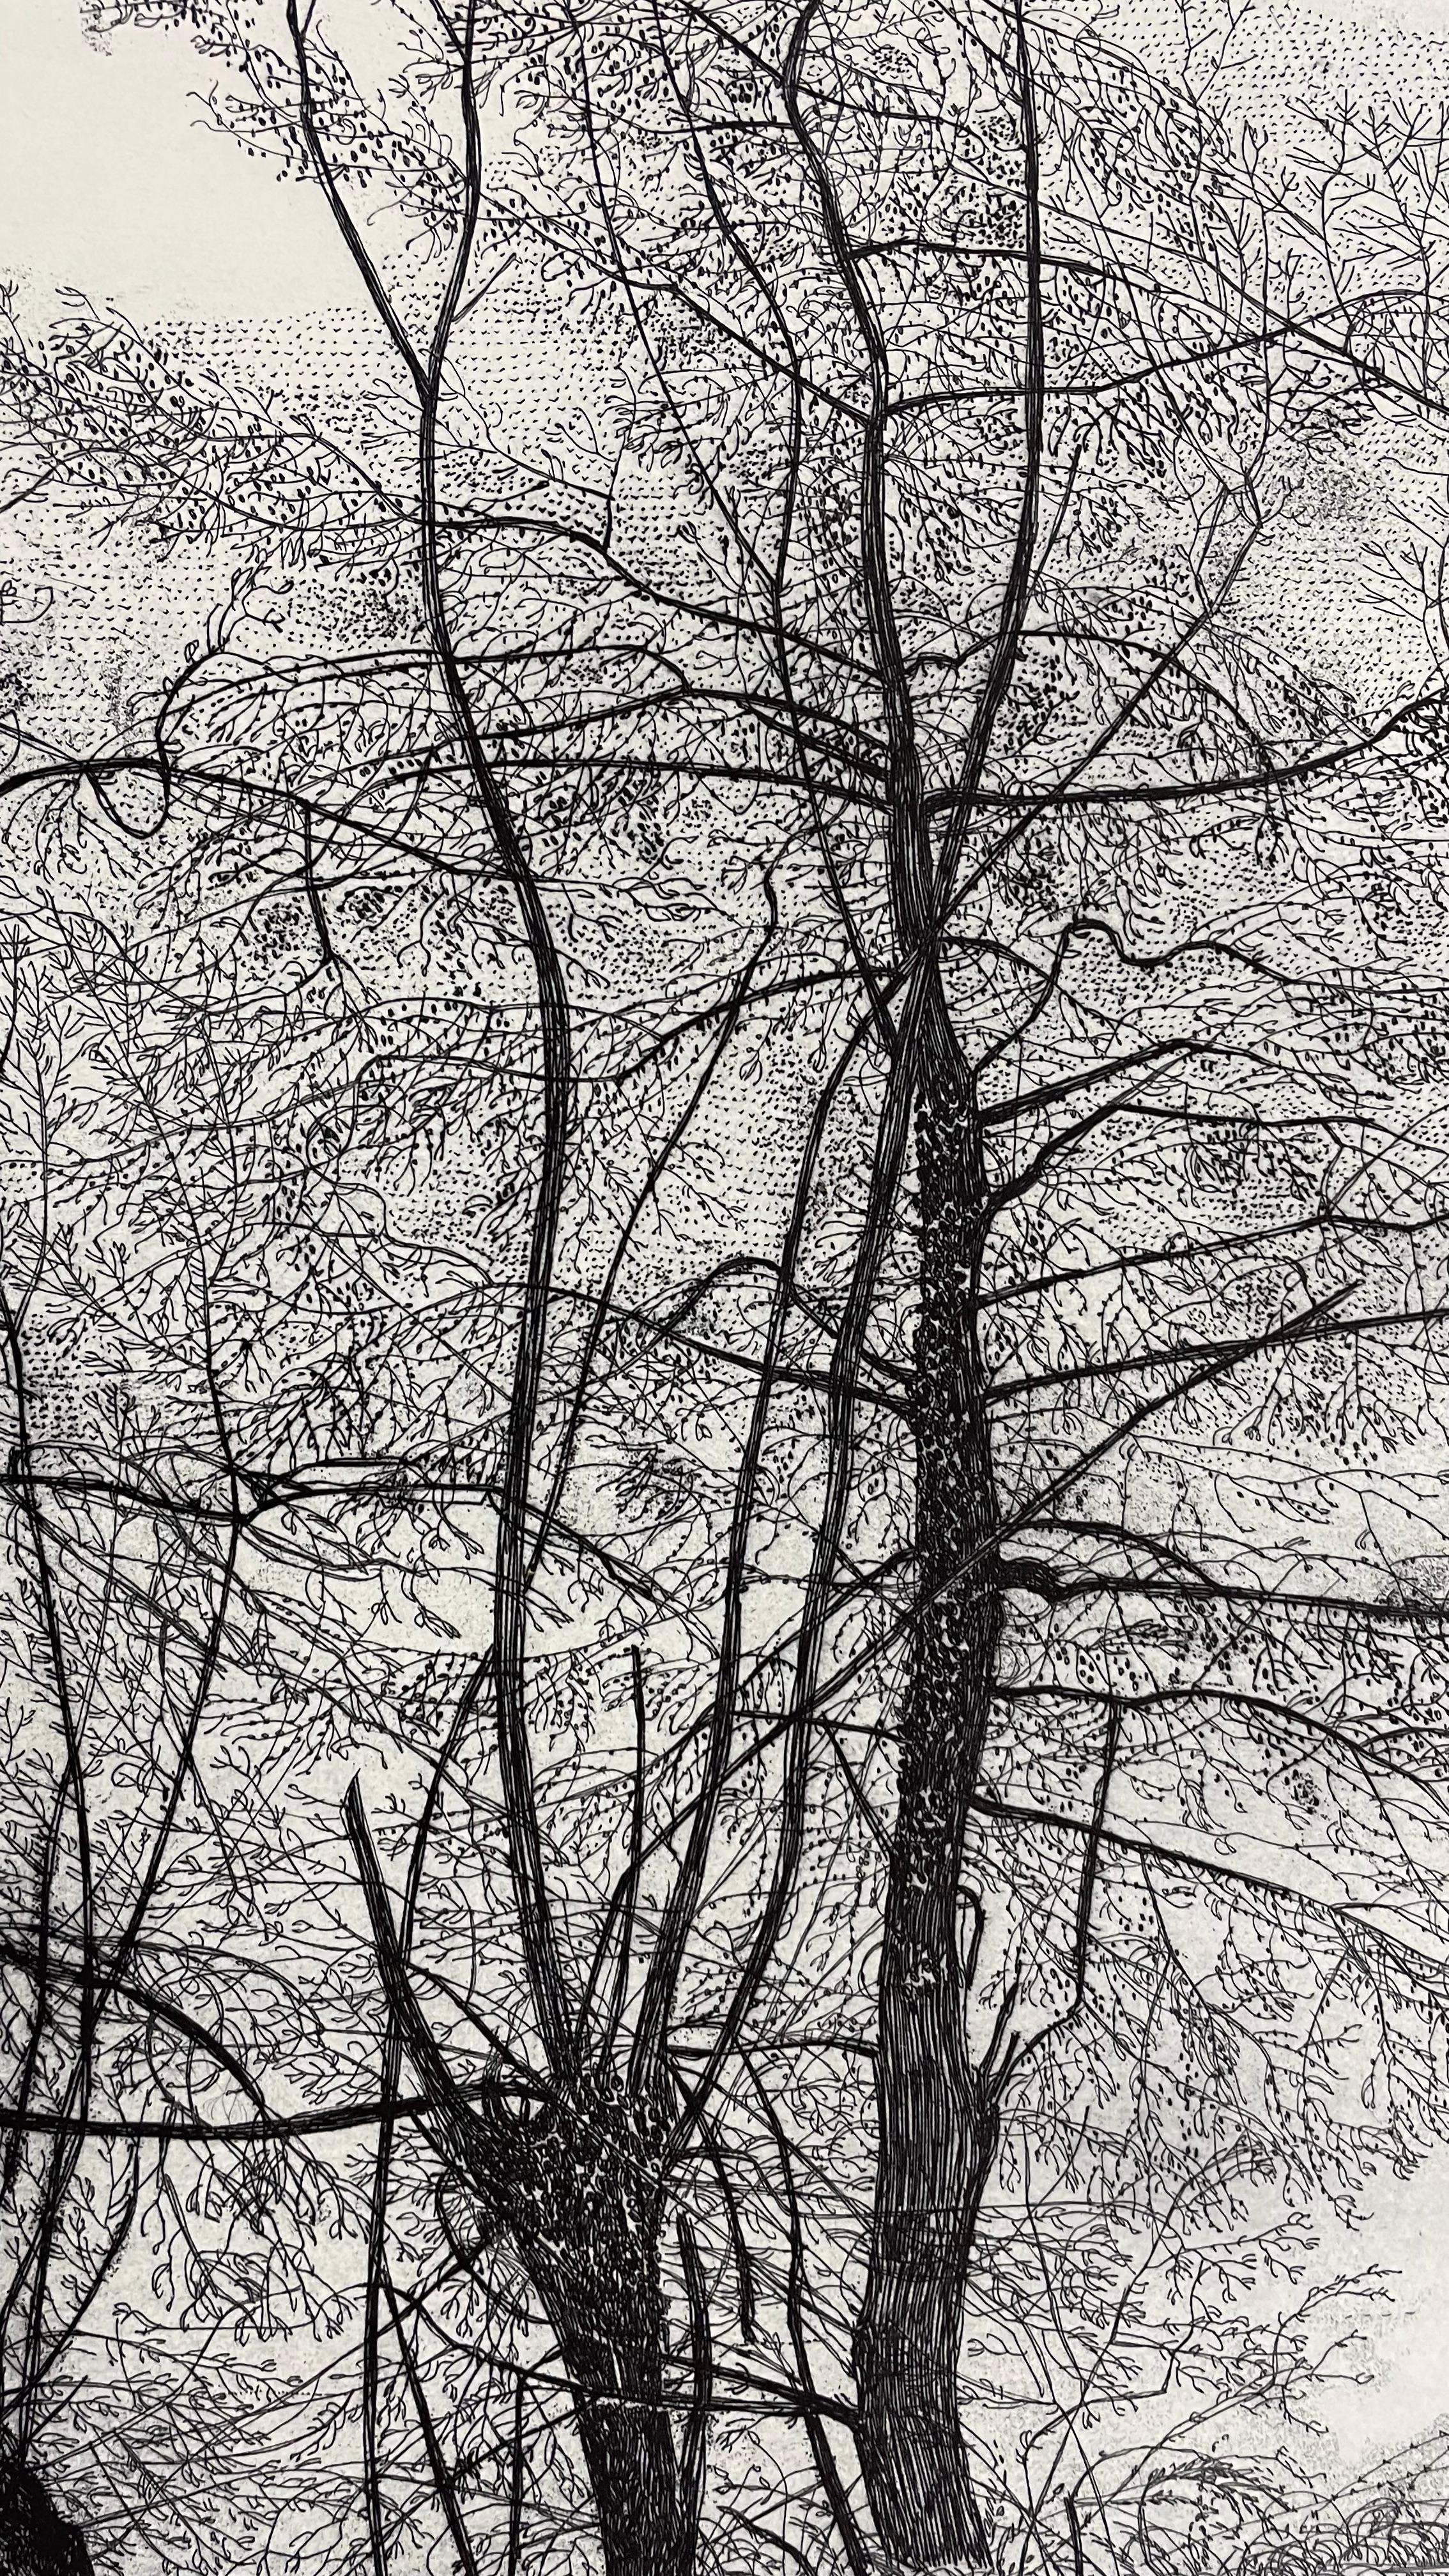 Etching of an autumnal scenery at the end of September  - Print by Federica Galli